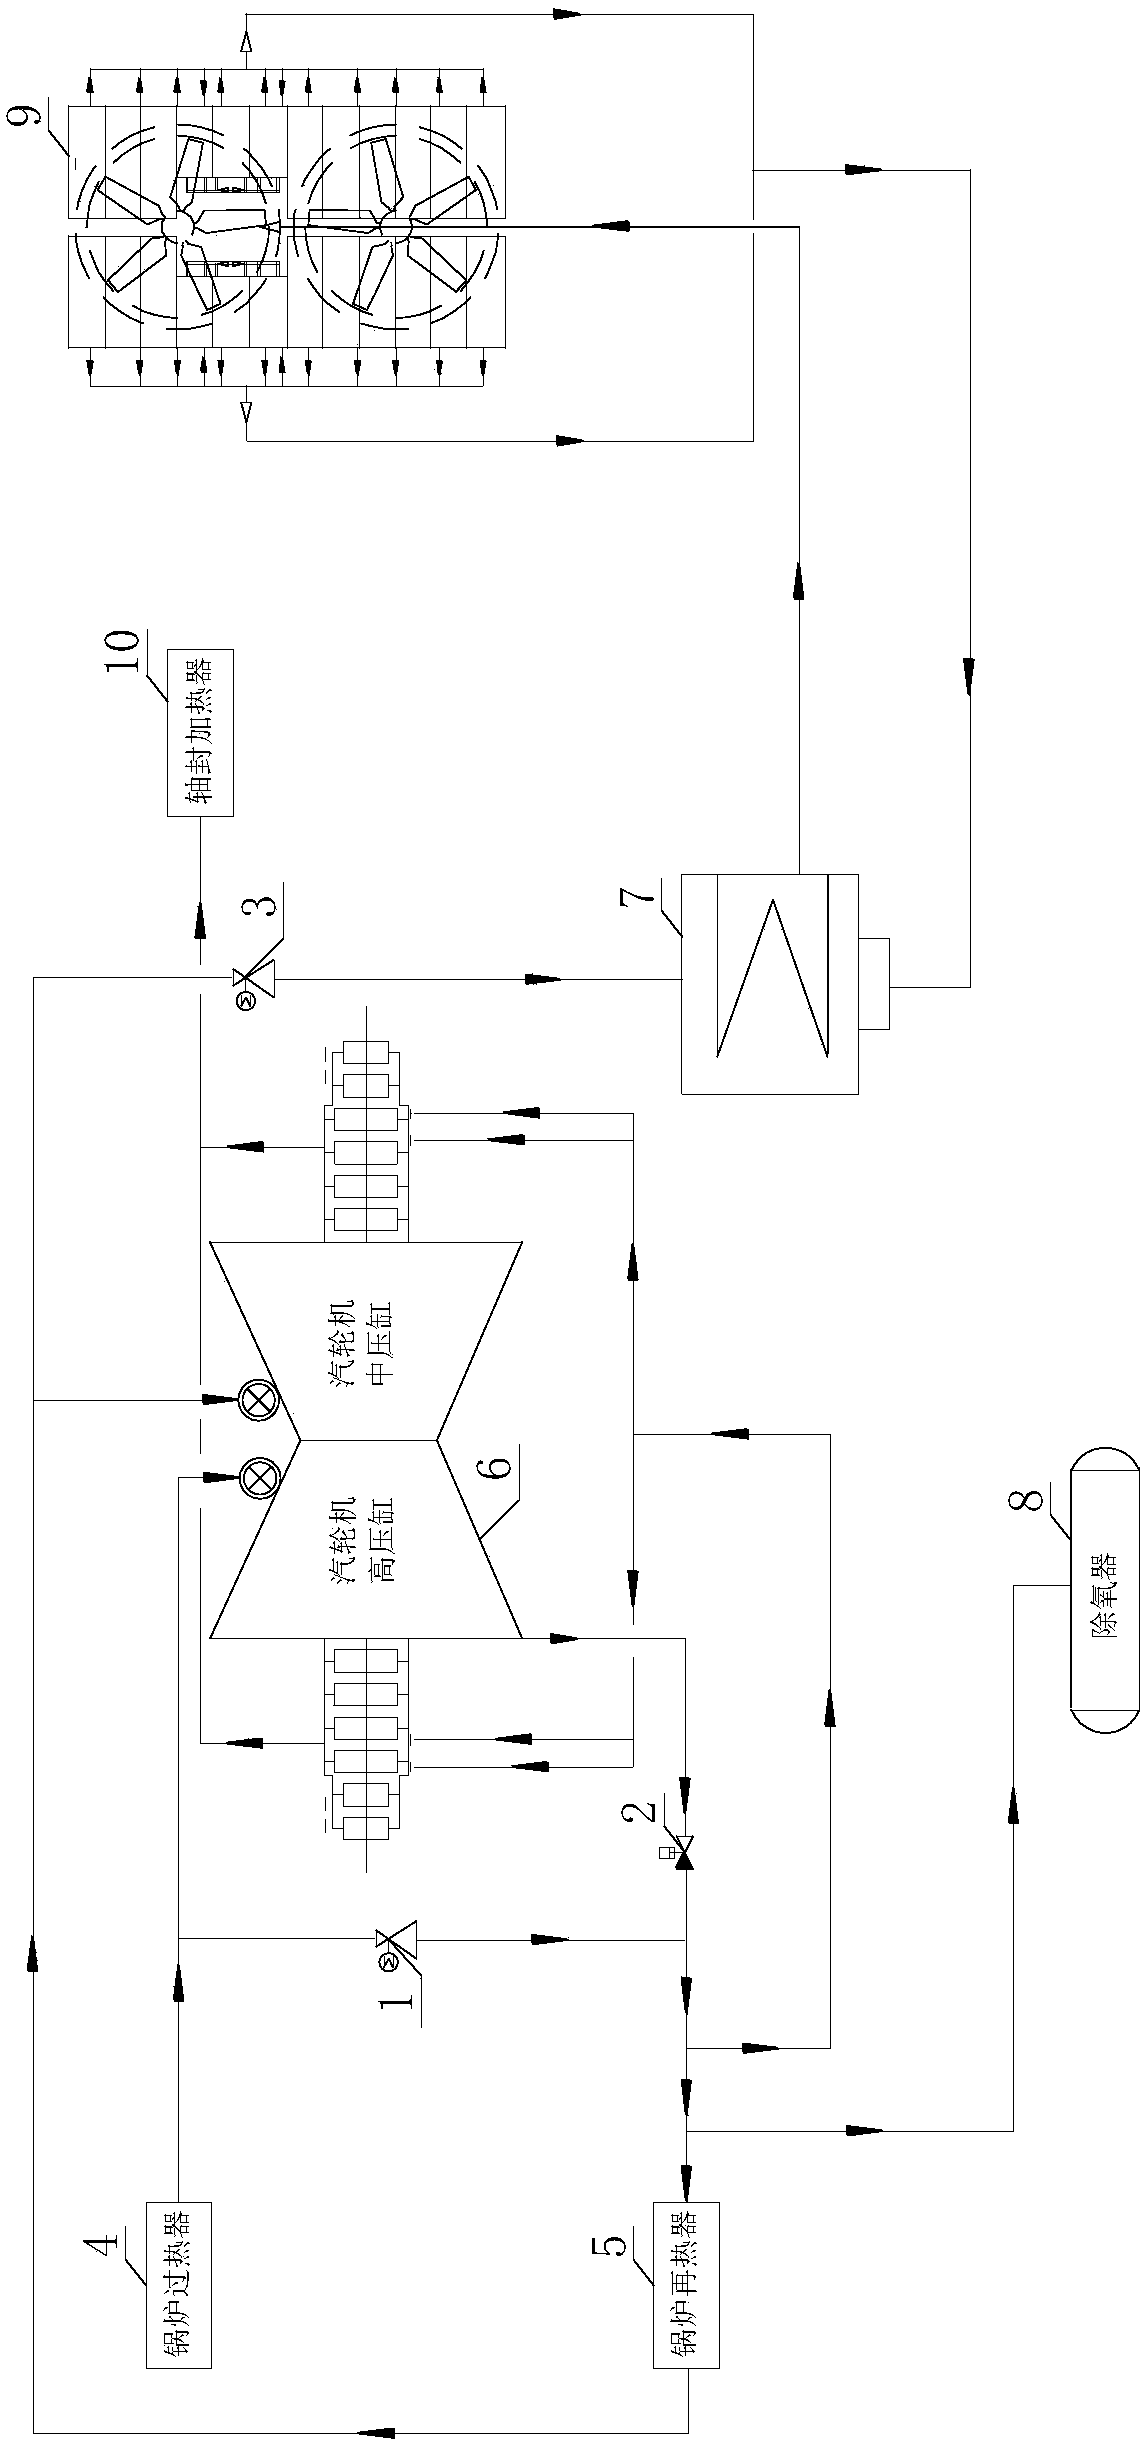 Starting method of non-starting steam after tripping of power generating set of thermal power plant